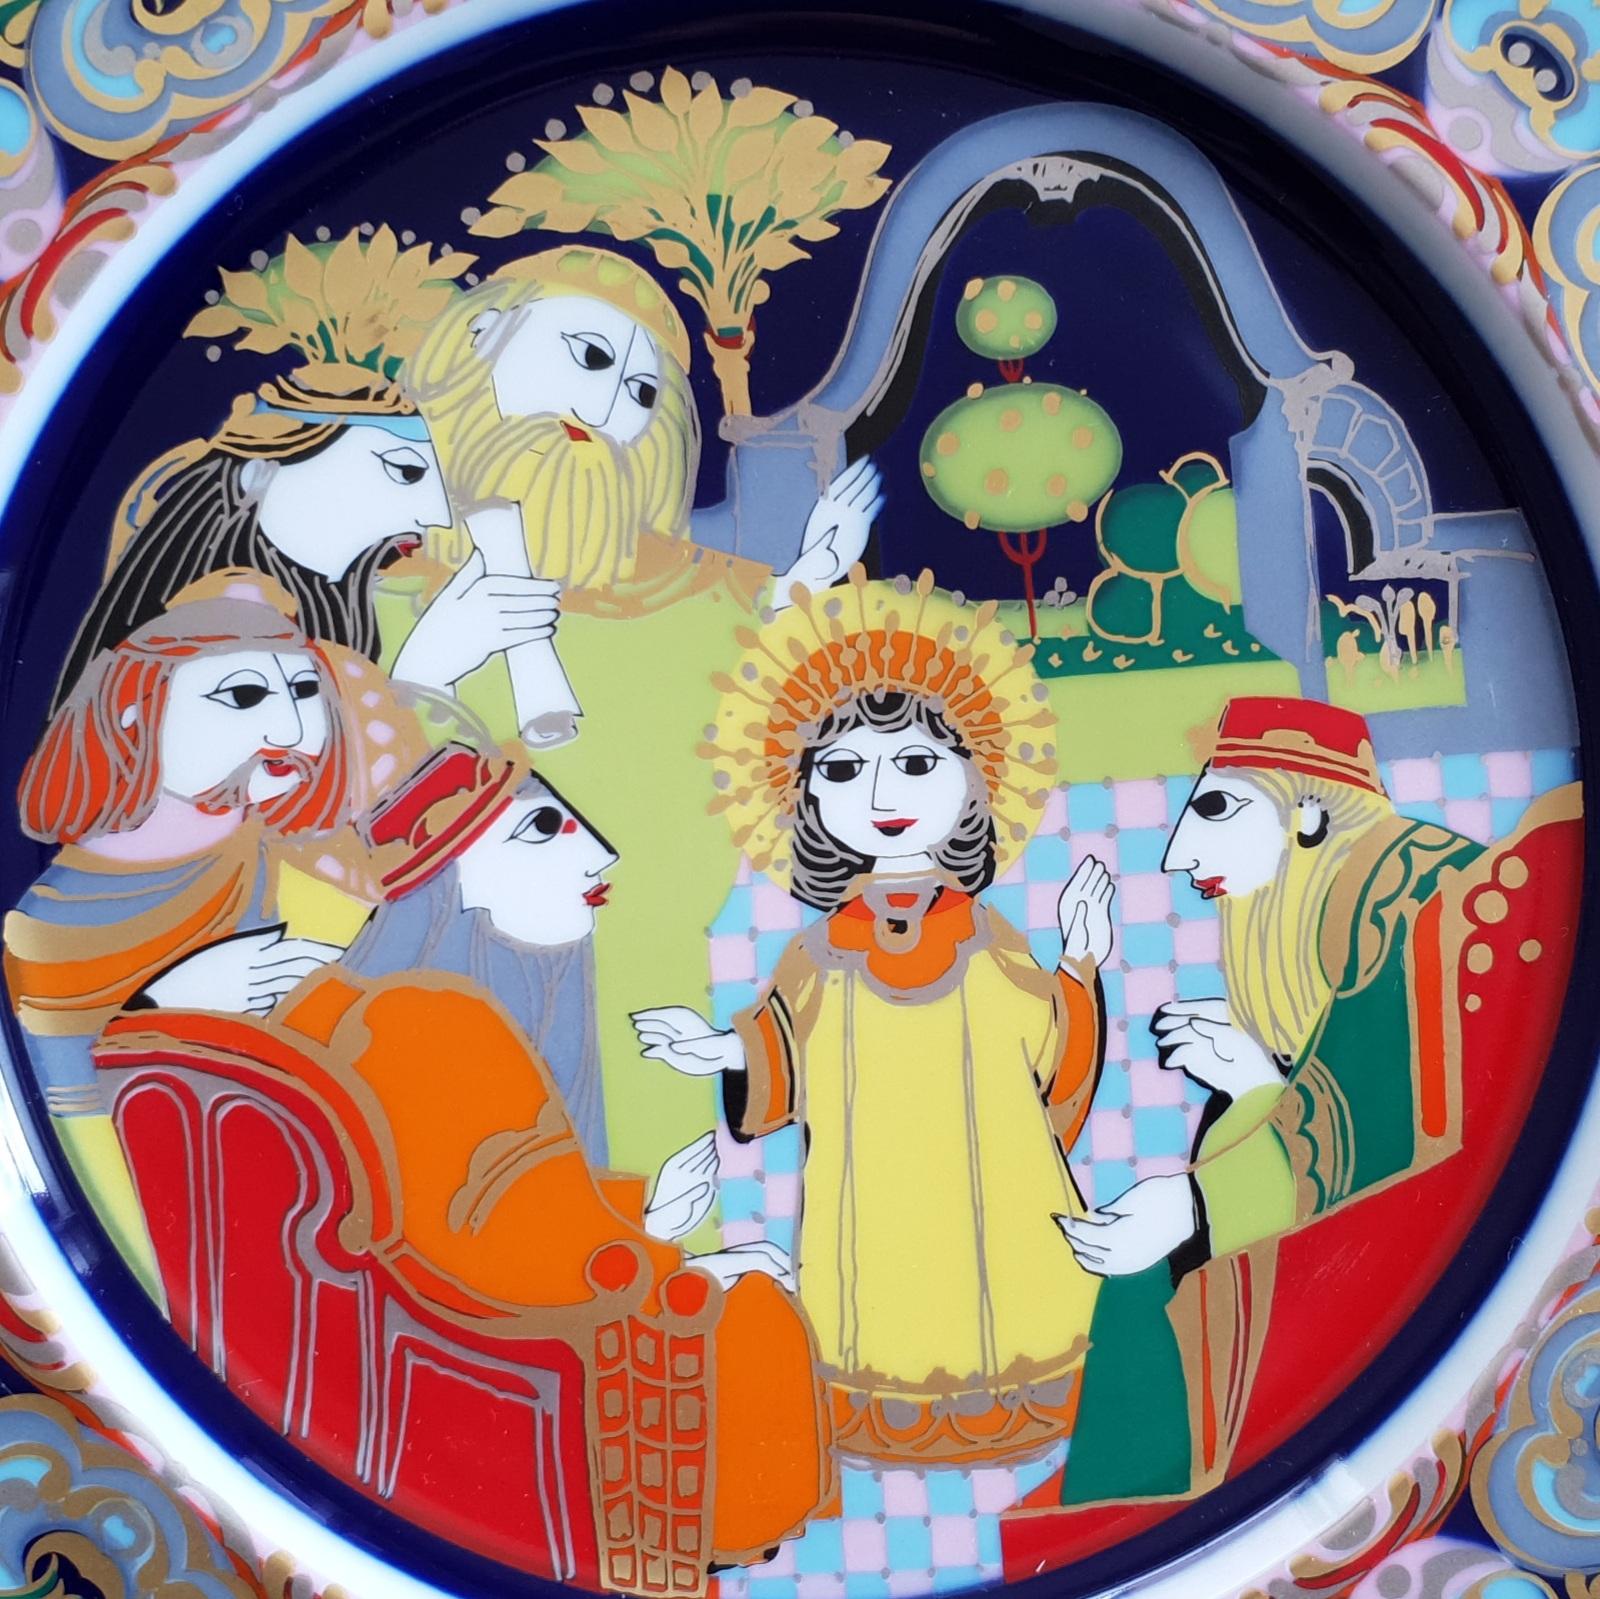 Bjørn Wiinblad porcelain Christmas plate 1981, produced by Rosenthal
Motif: The Child with the scholars in the Temple
Designed by: Bjørn Wiinblad 
Diameter: 11